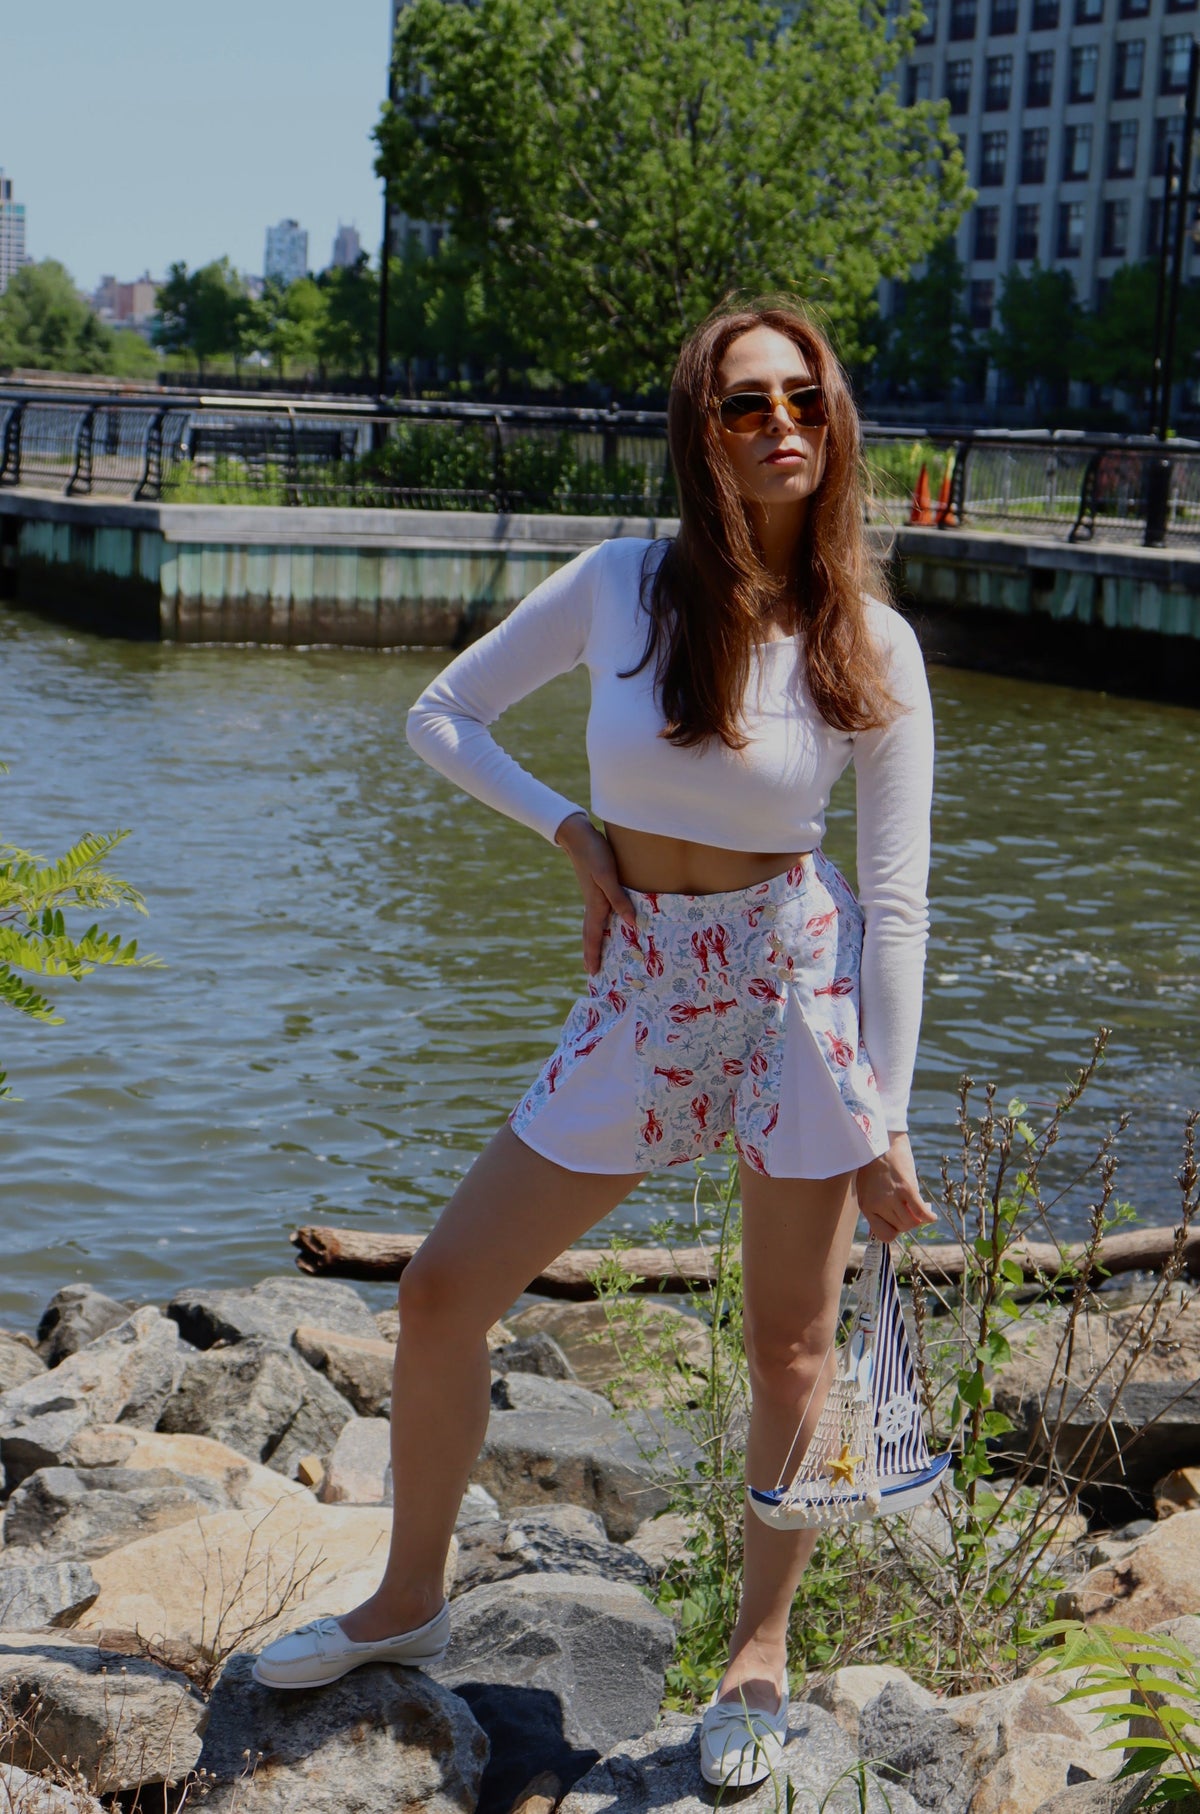 Model wearing pleated blue and red lobster print cotton shorts and white long sleeve crop top with her hand on her hip looking off to the side, standing on rocks in front of a river.